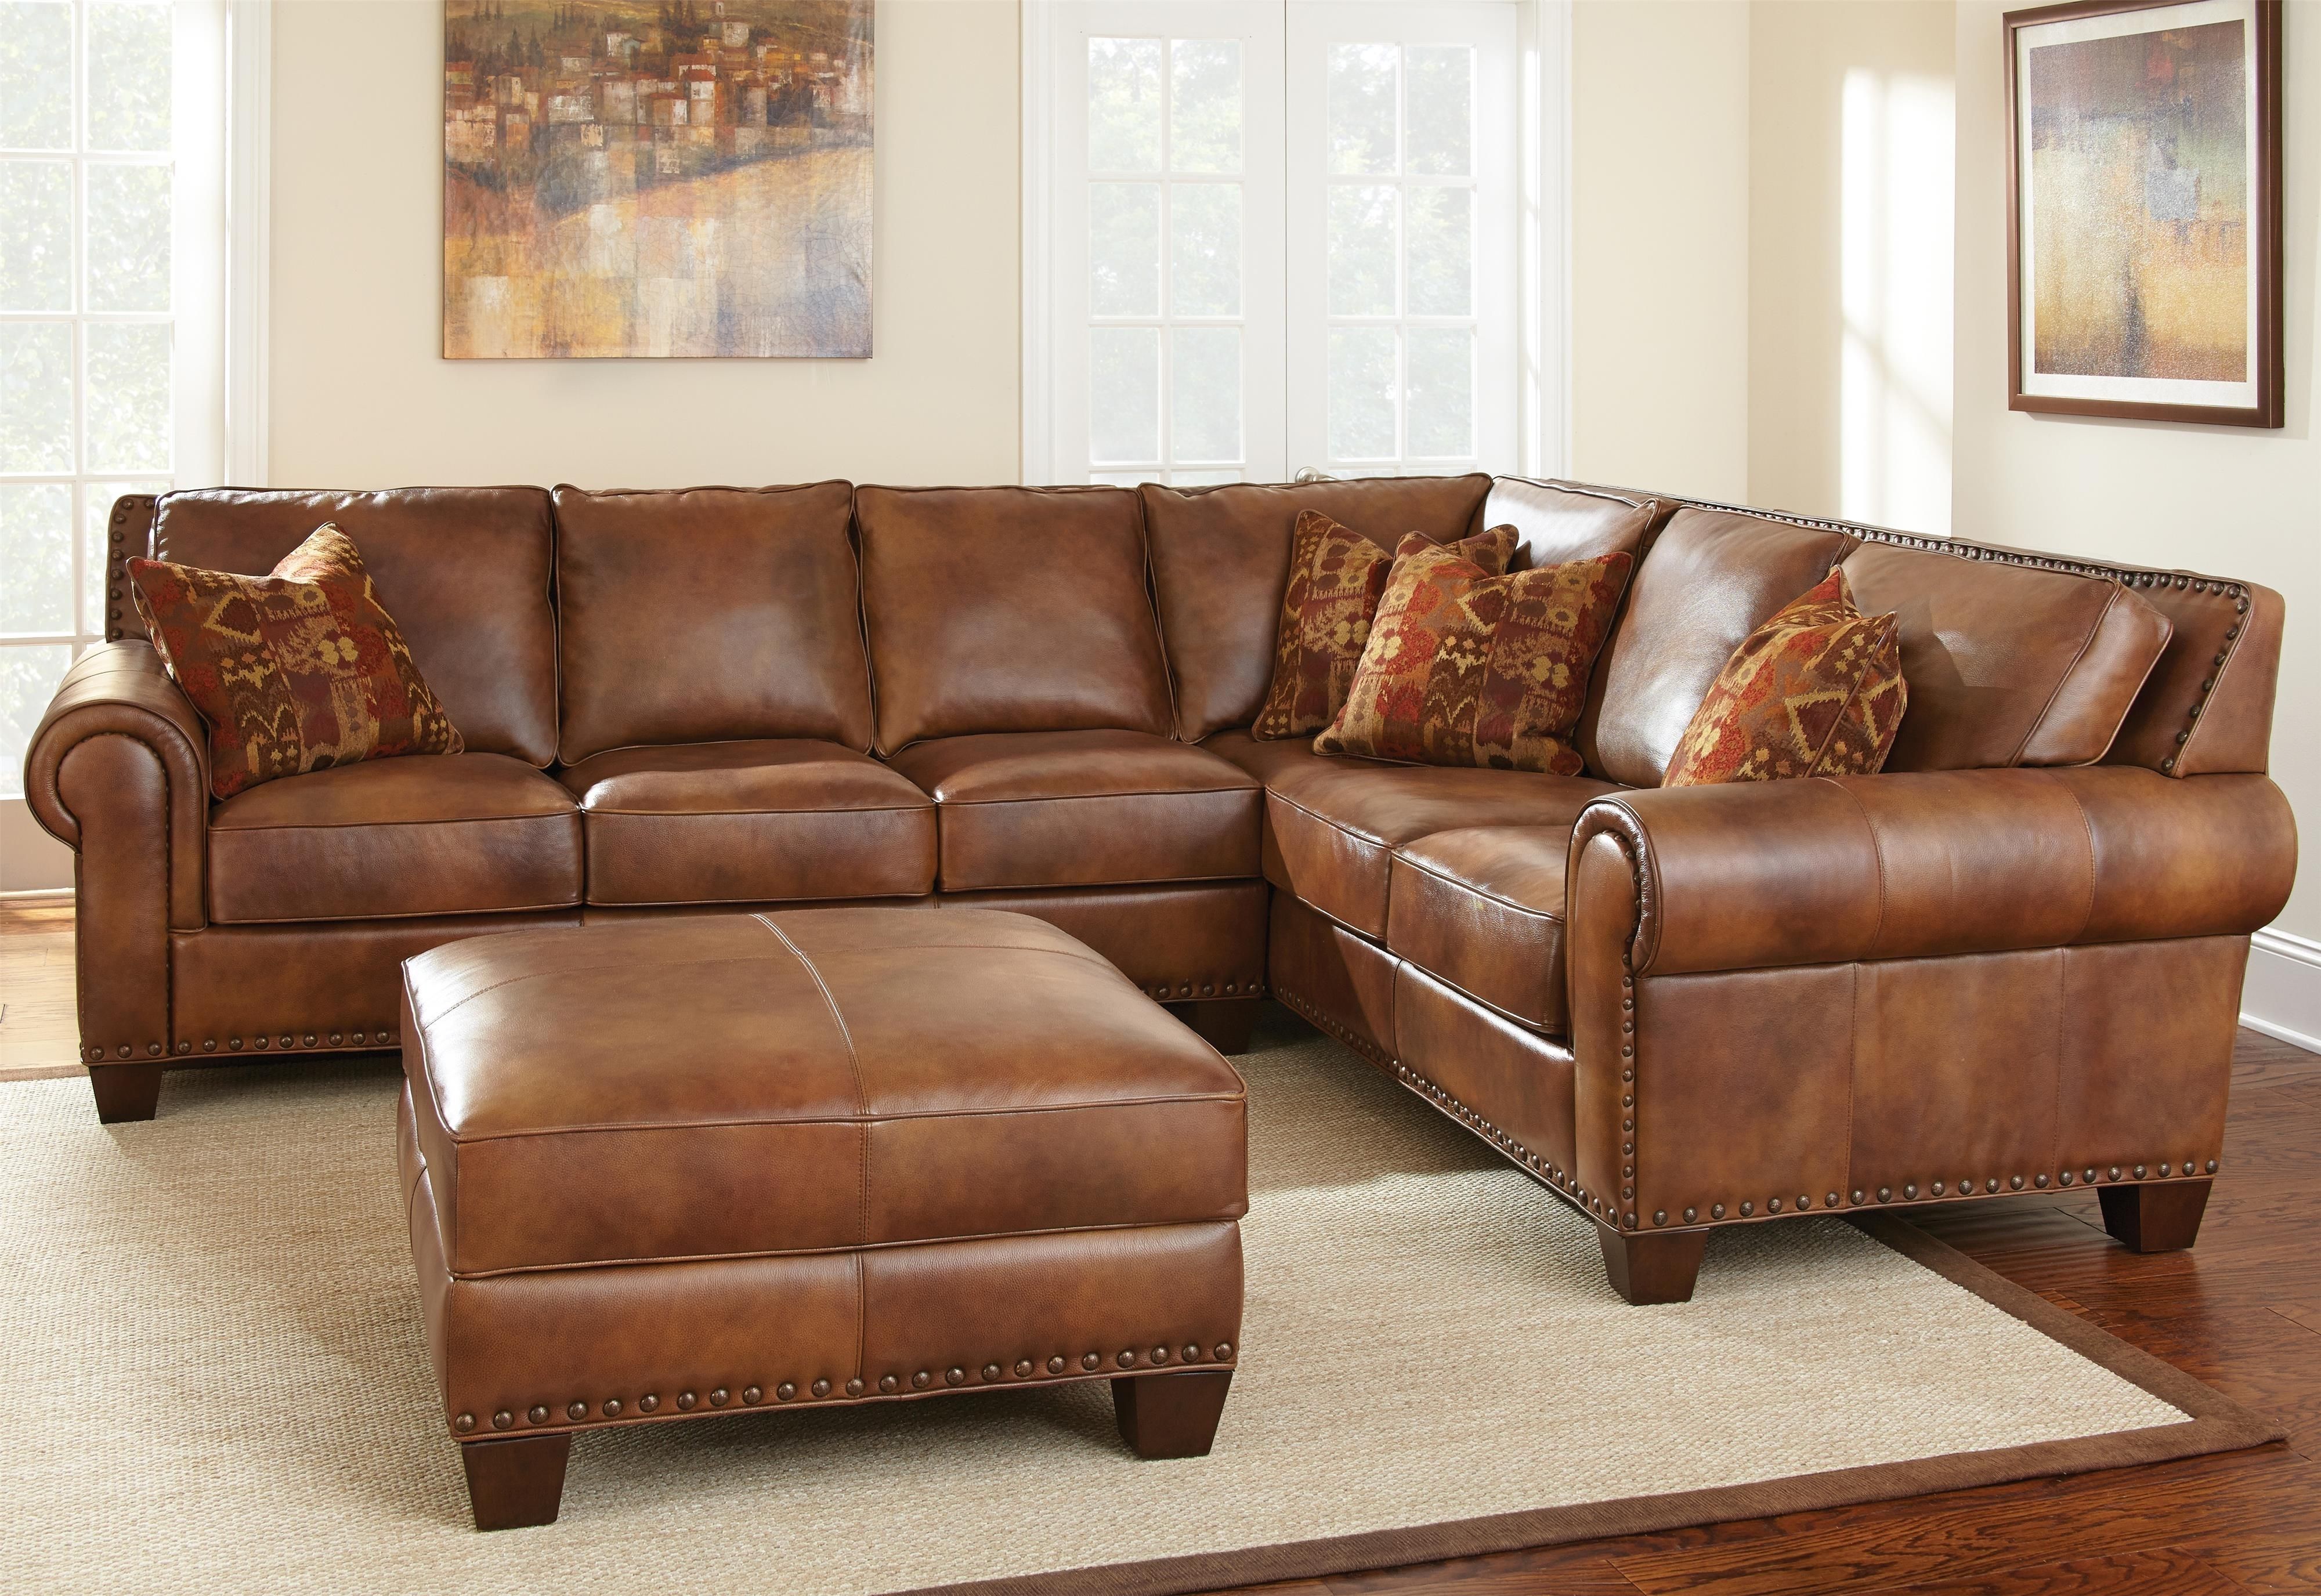 Steve Silver Silverado 2 Piece Sectional – Item Number: Sr960ral+laf Inside Ivan Smith Sectional Sofas (View 6 of 10)